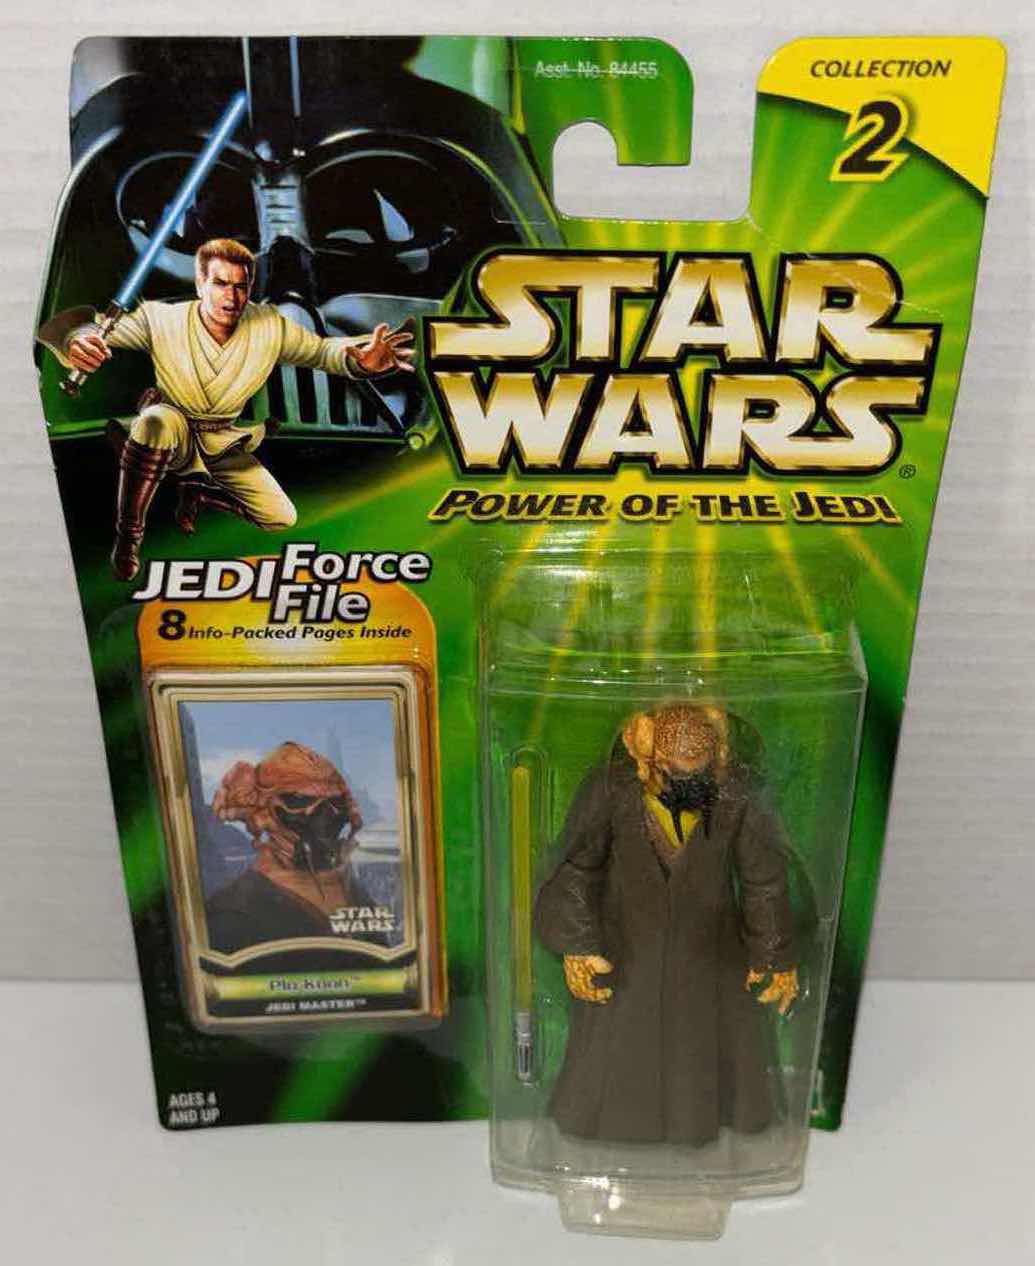 Photo 1 of NEW HASBRO STAR WARS POWER OF THE JEDI ACTION FIGURE, PLO KOON & JEDI FORCE FILE